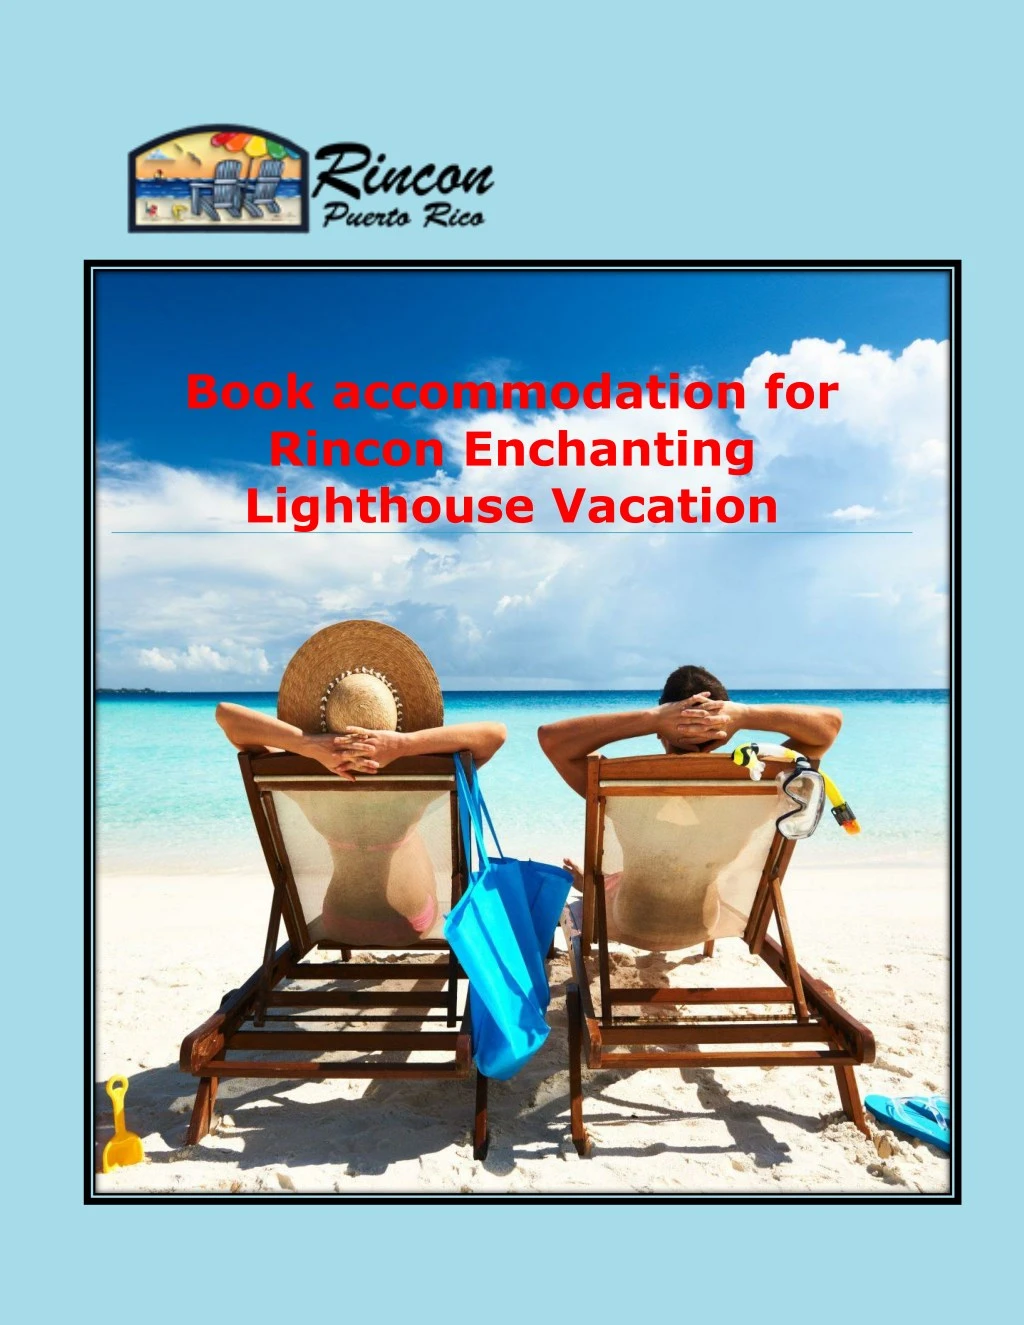 book accommodation for rincon enchanting